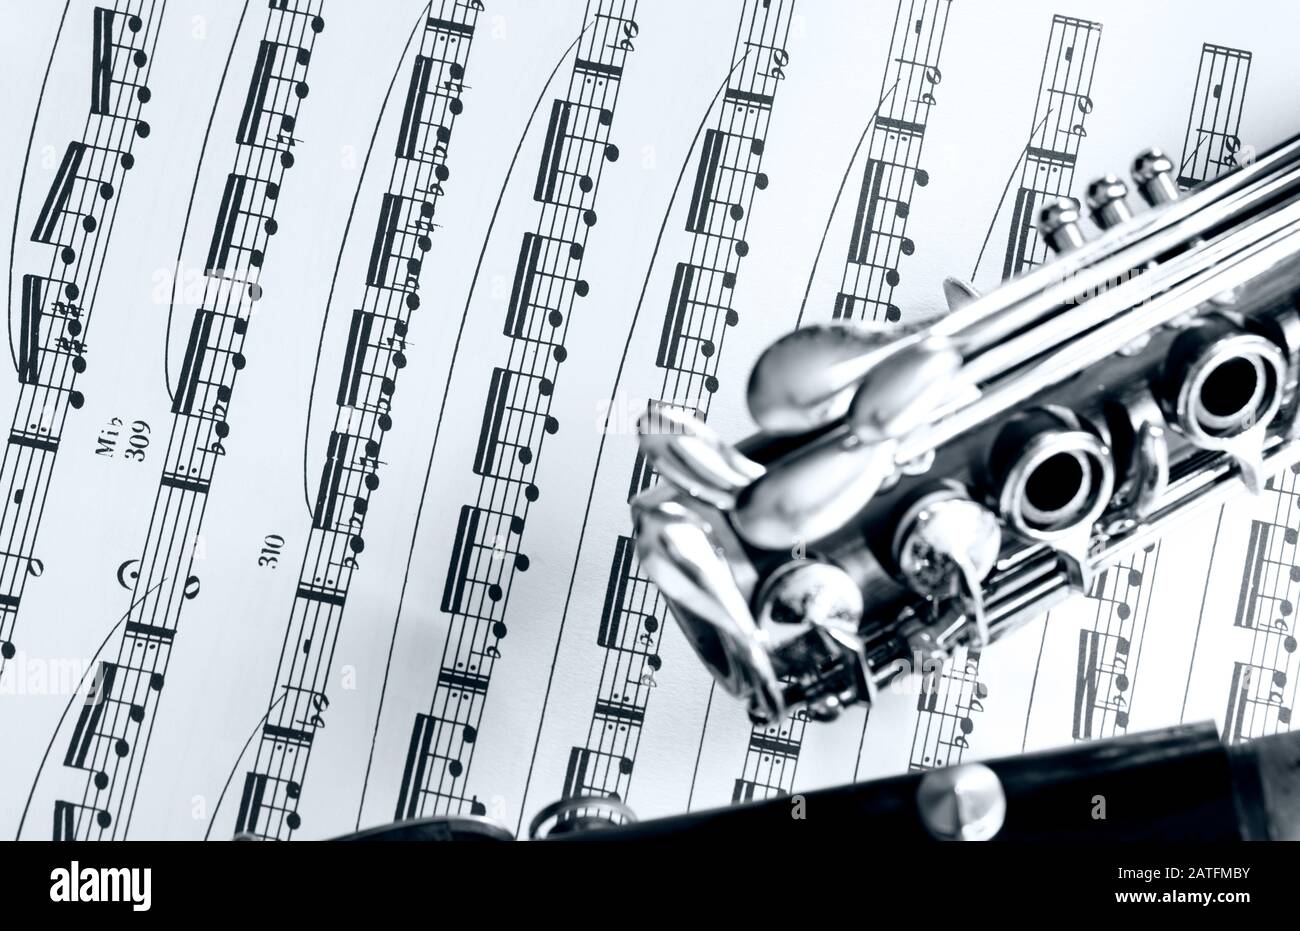 part of the clarinet body on a partiture with printed notes Stock Photo